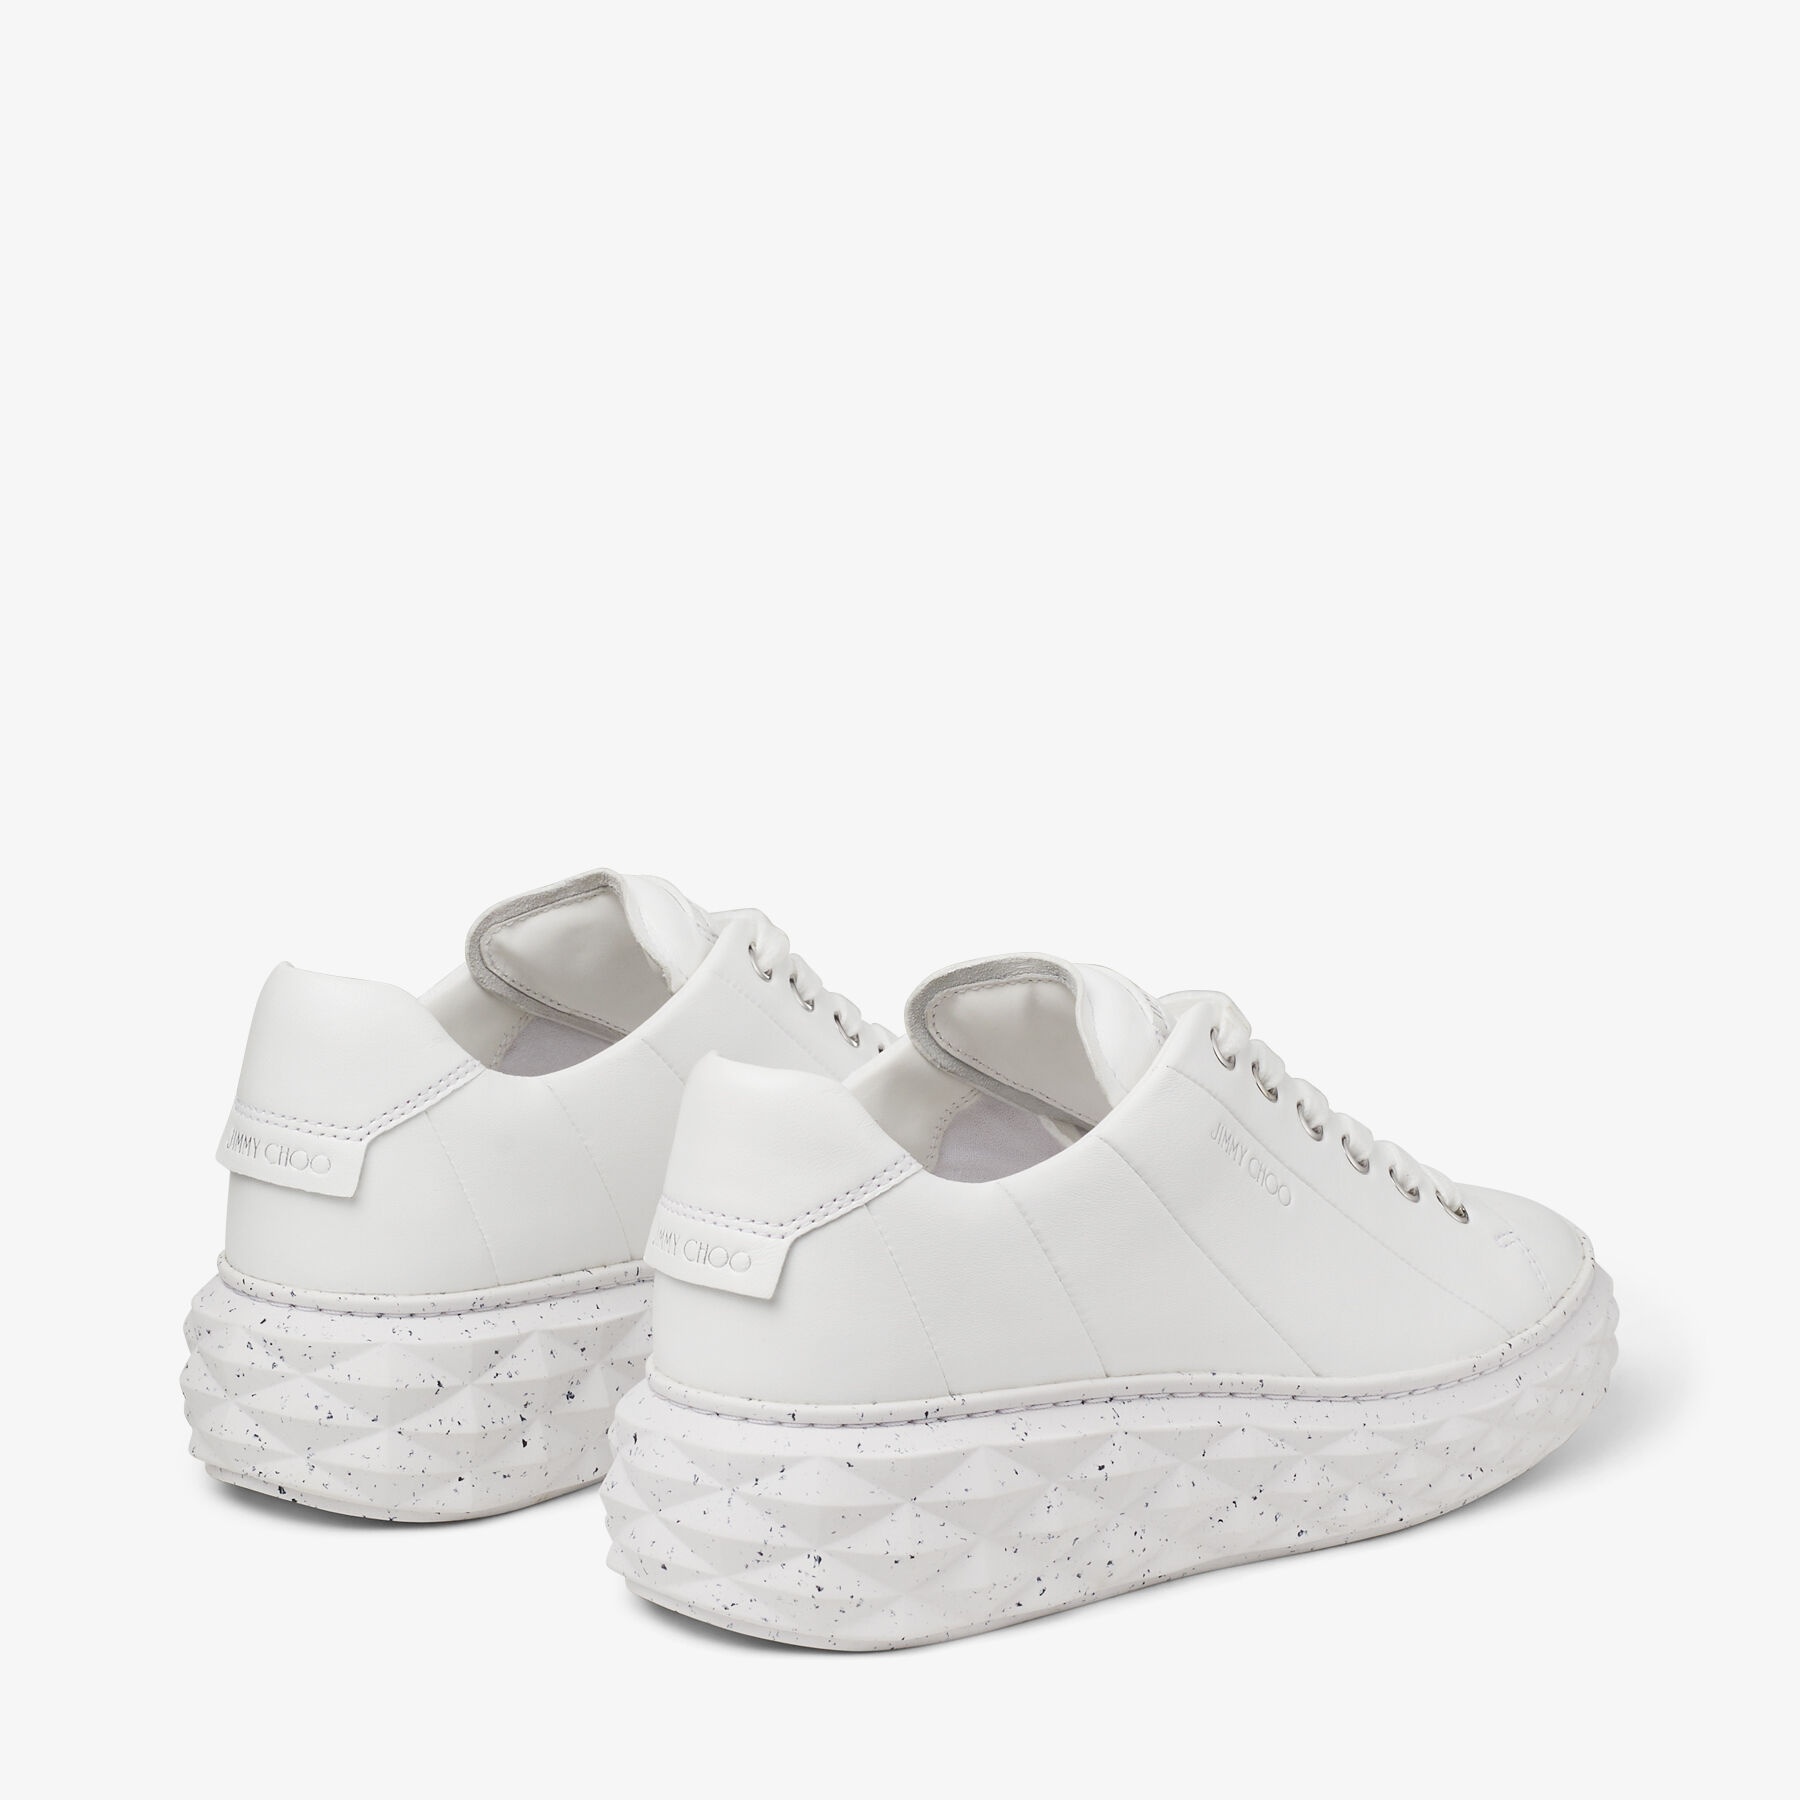 Diamond Light Maxi/F
White Nappa Leather Low-Top Trainers with Platform Sole - 7